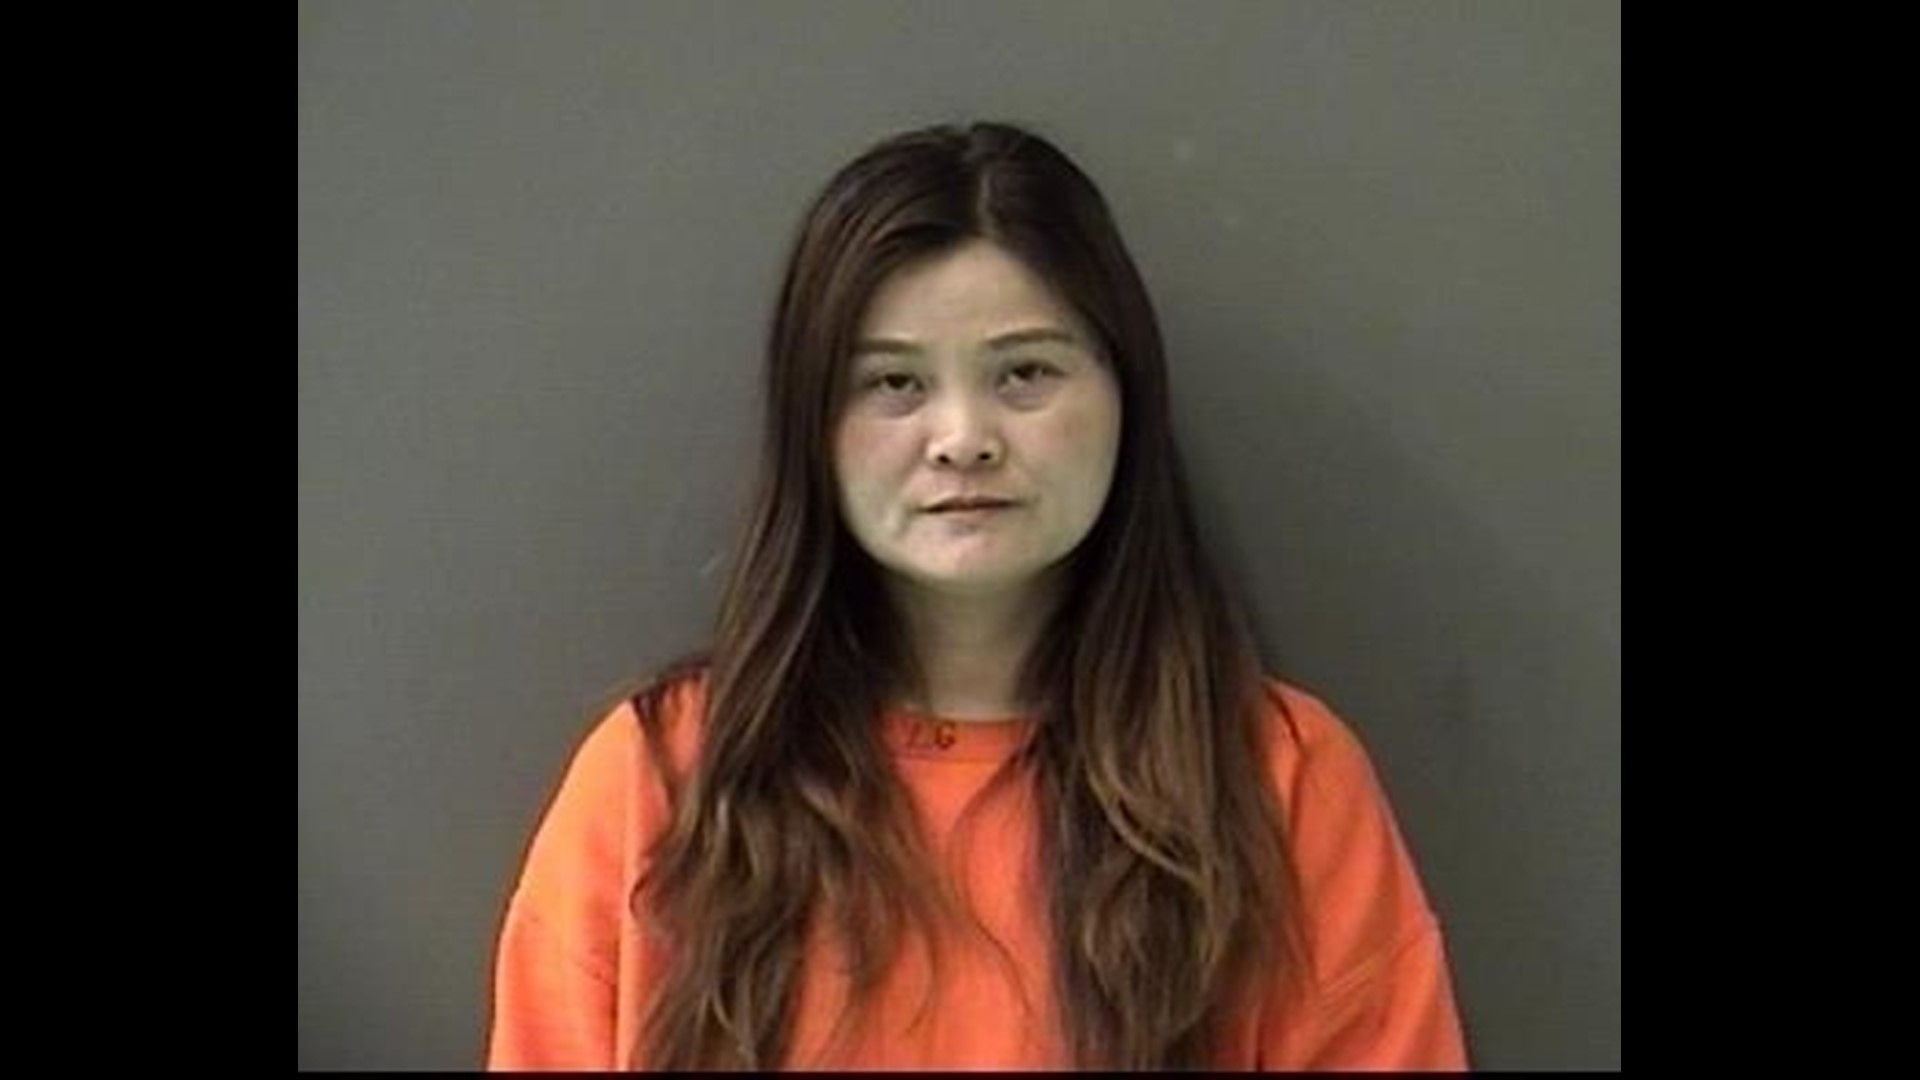 13 People Arrested In Massage Parlor Busts In Central Texas